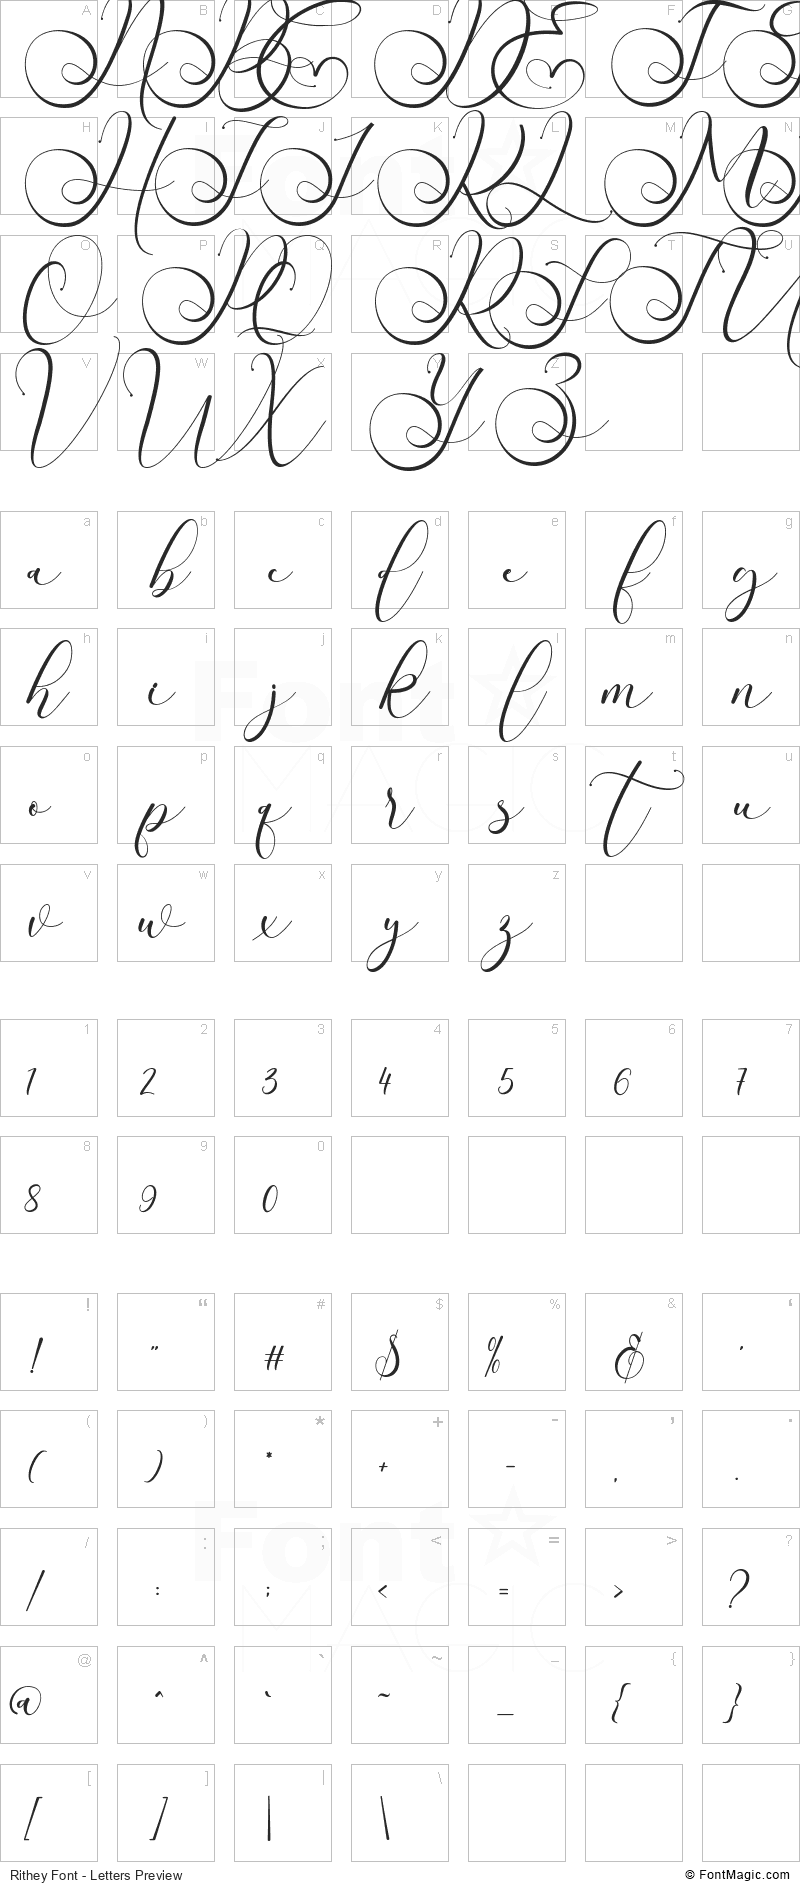 Rithey Font - All Latters Preview Chart